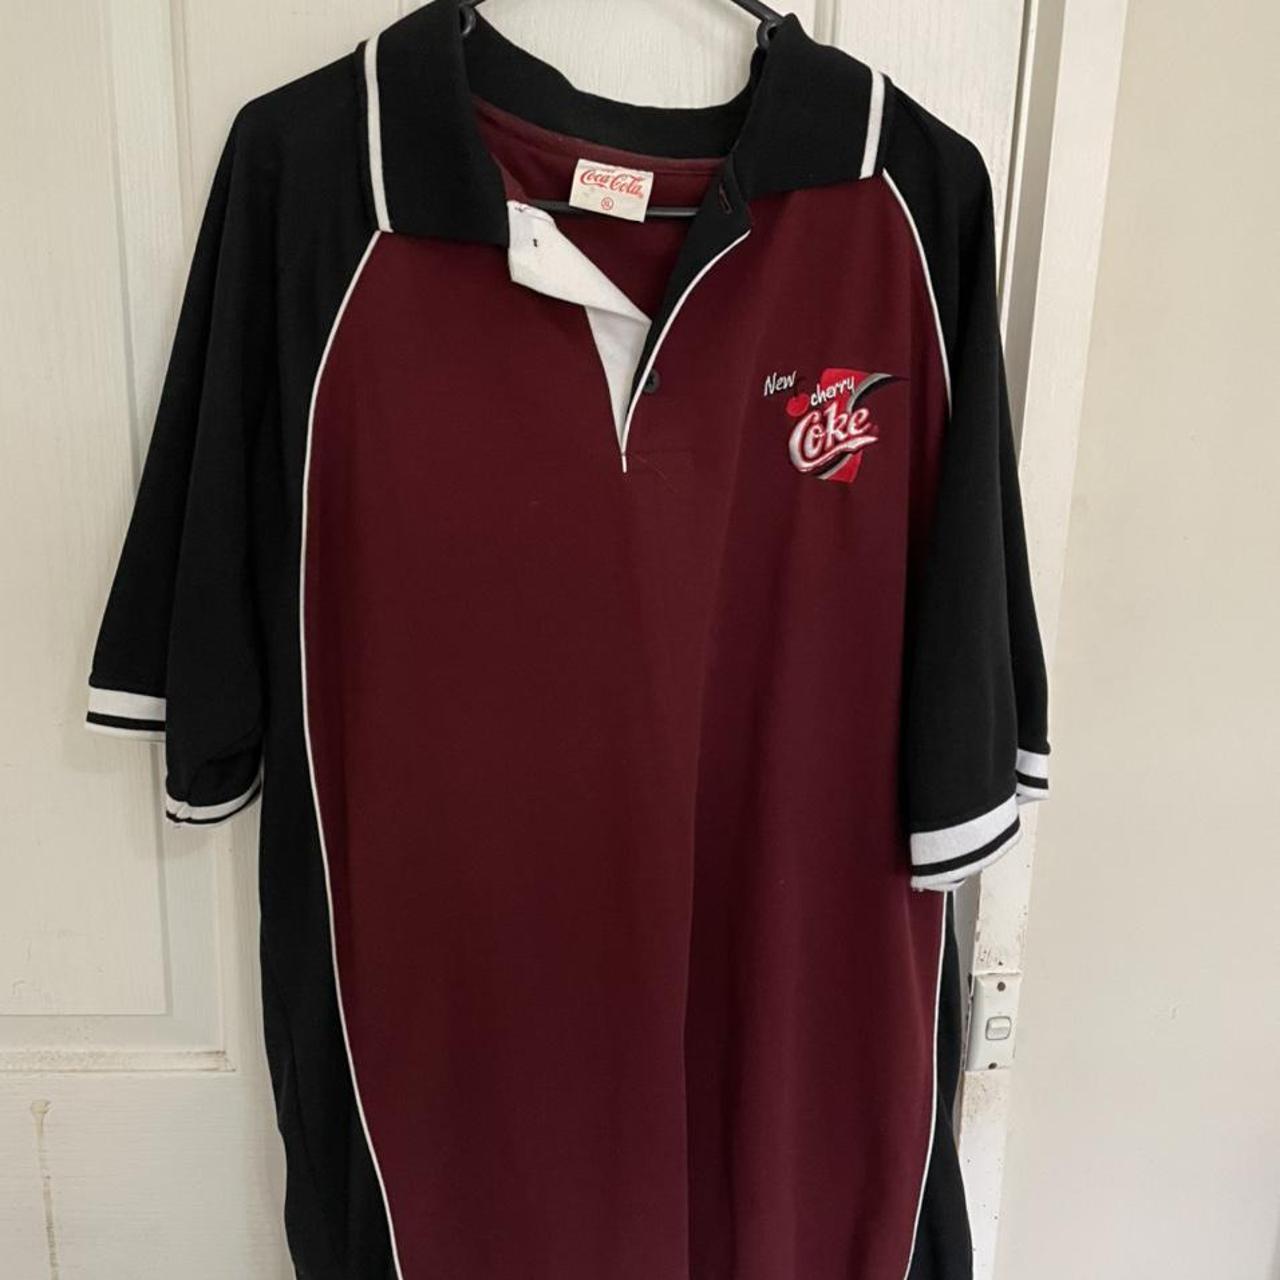 Vintage Coca-Cola cherry polo shirt. Embroided ‘New... - Depop